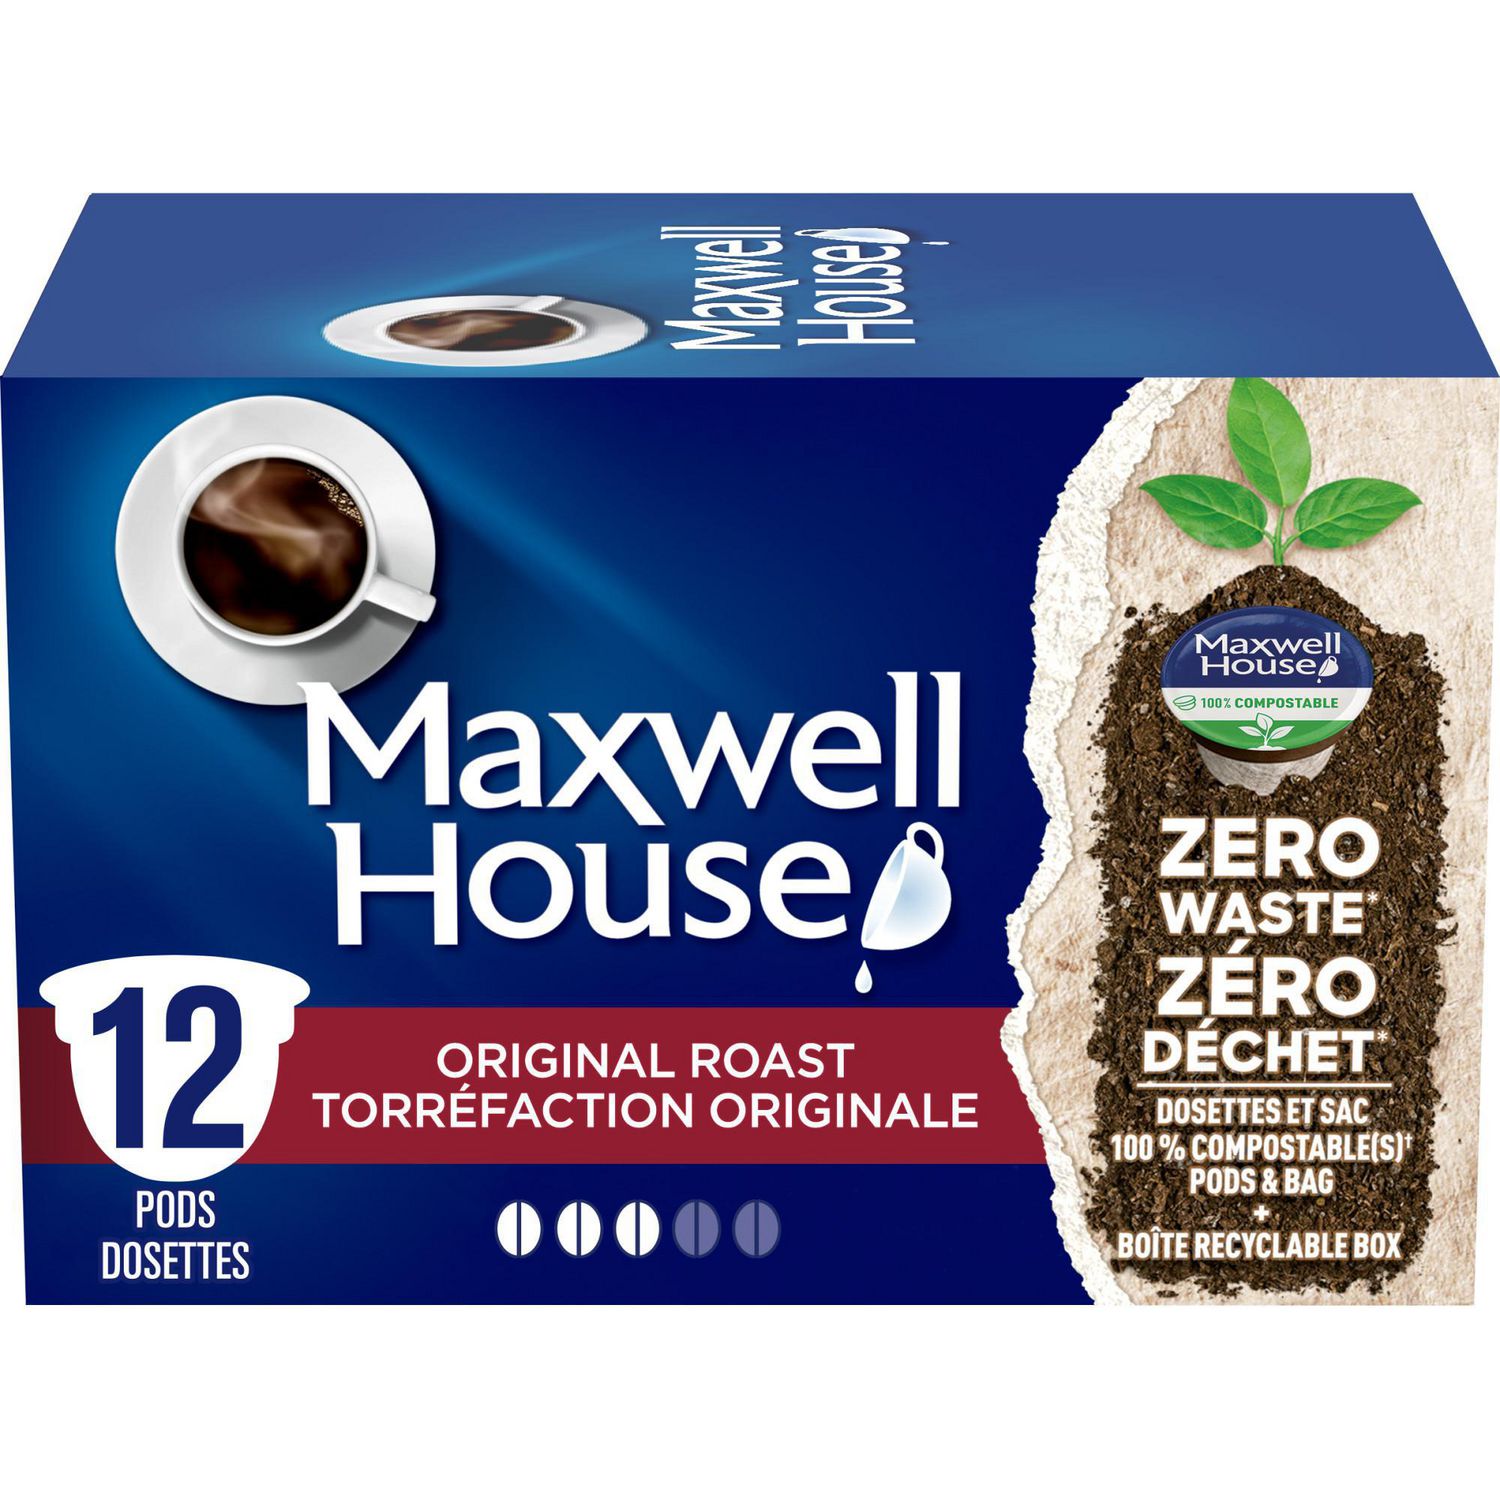 Maxwell House Coffee Manufacturer Coupons / Has Maxwell House Coffee